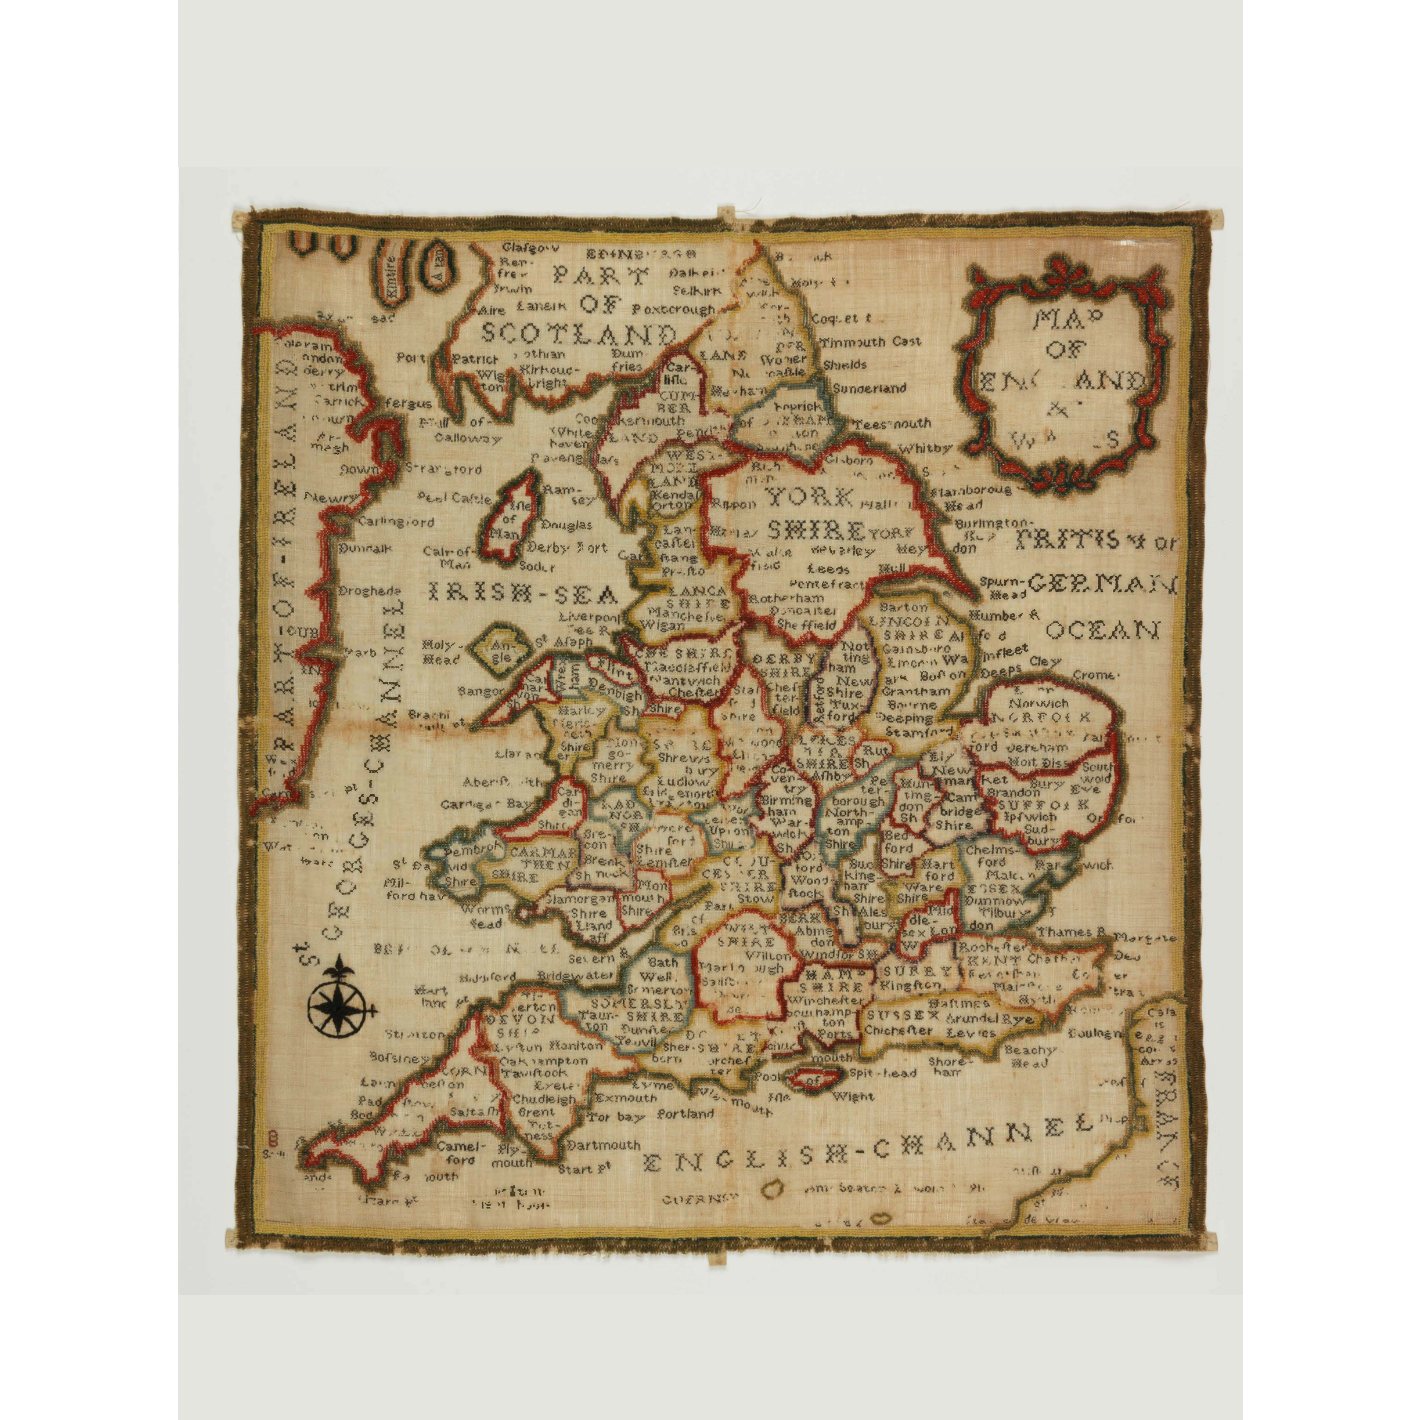 Embroidered map sampler by Ann Seaton, showing the counties of England and Wales. From the collection of The Fitzwilliam Museum.